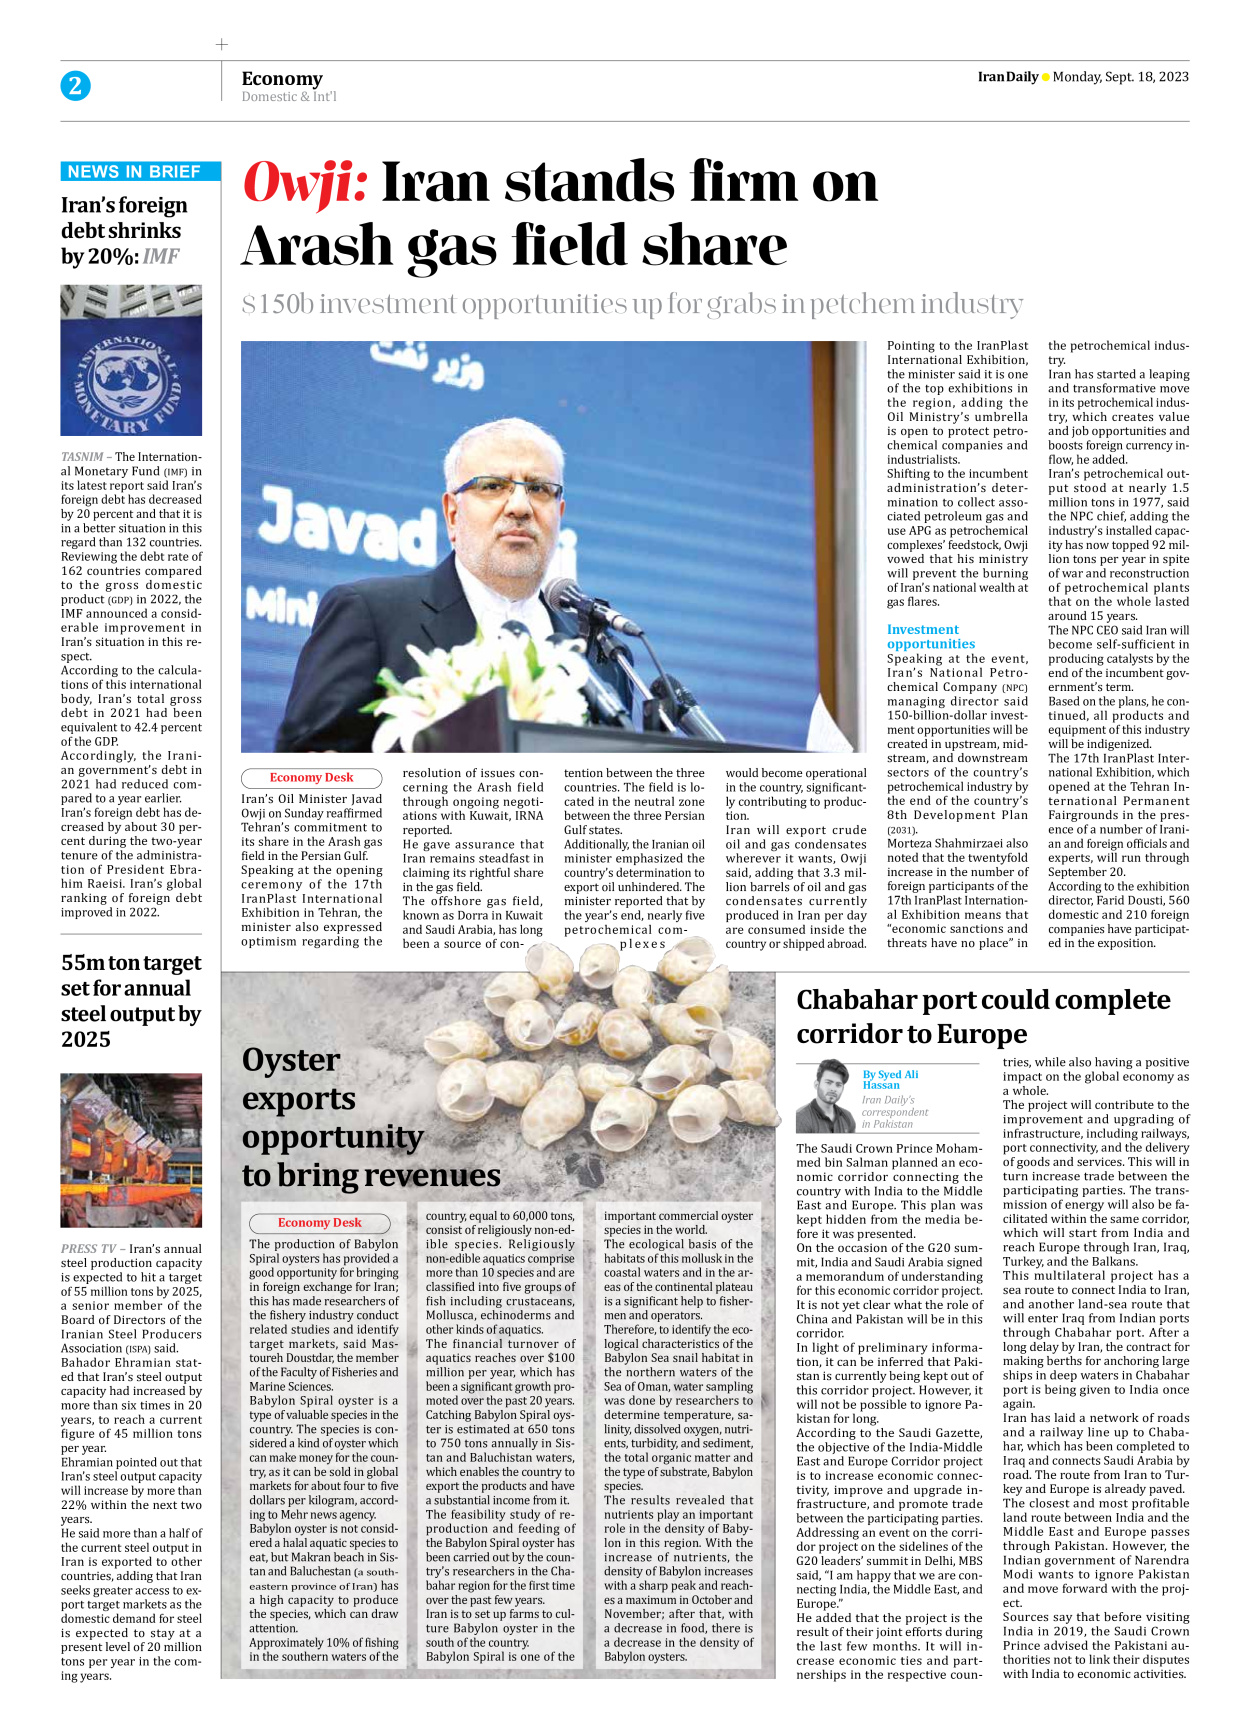 Iran Daily - Number Seven Thousand Three Hundred and Eighty Eight - 18 September 2023 - Page 2